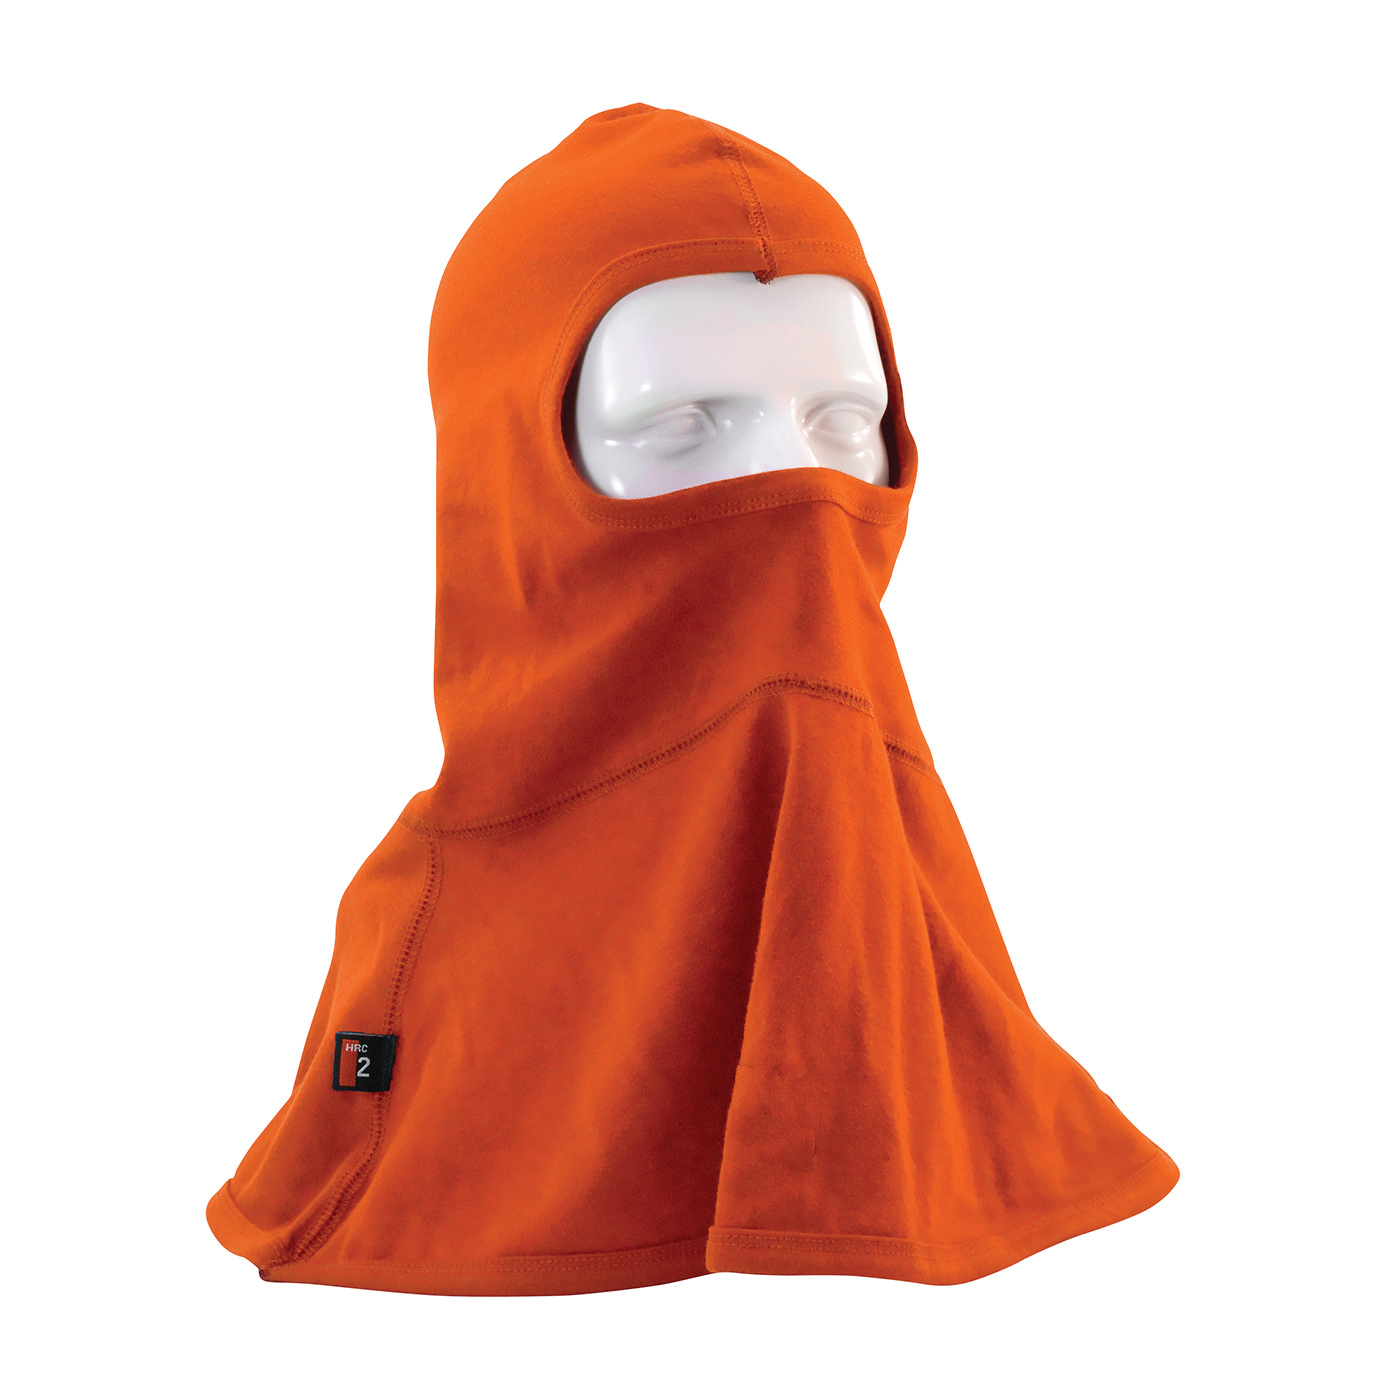 PIP® 385-FRBL11-OR Single Layer Arc and Flame Resistant Balaclava, Universal, Orange, 17-1/4 in L, Interlock Cotton Knit, 6.5 oz Fabric, Full Face Closure